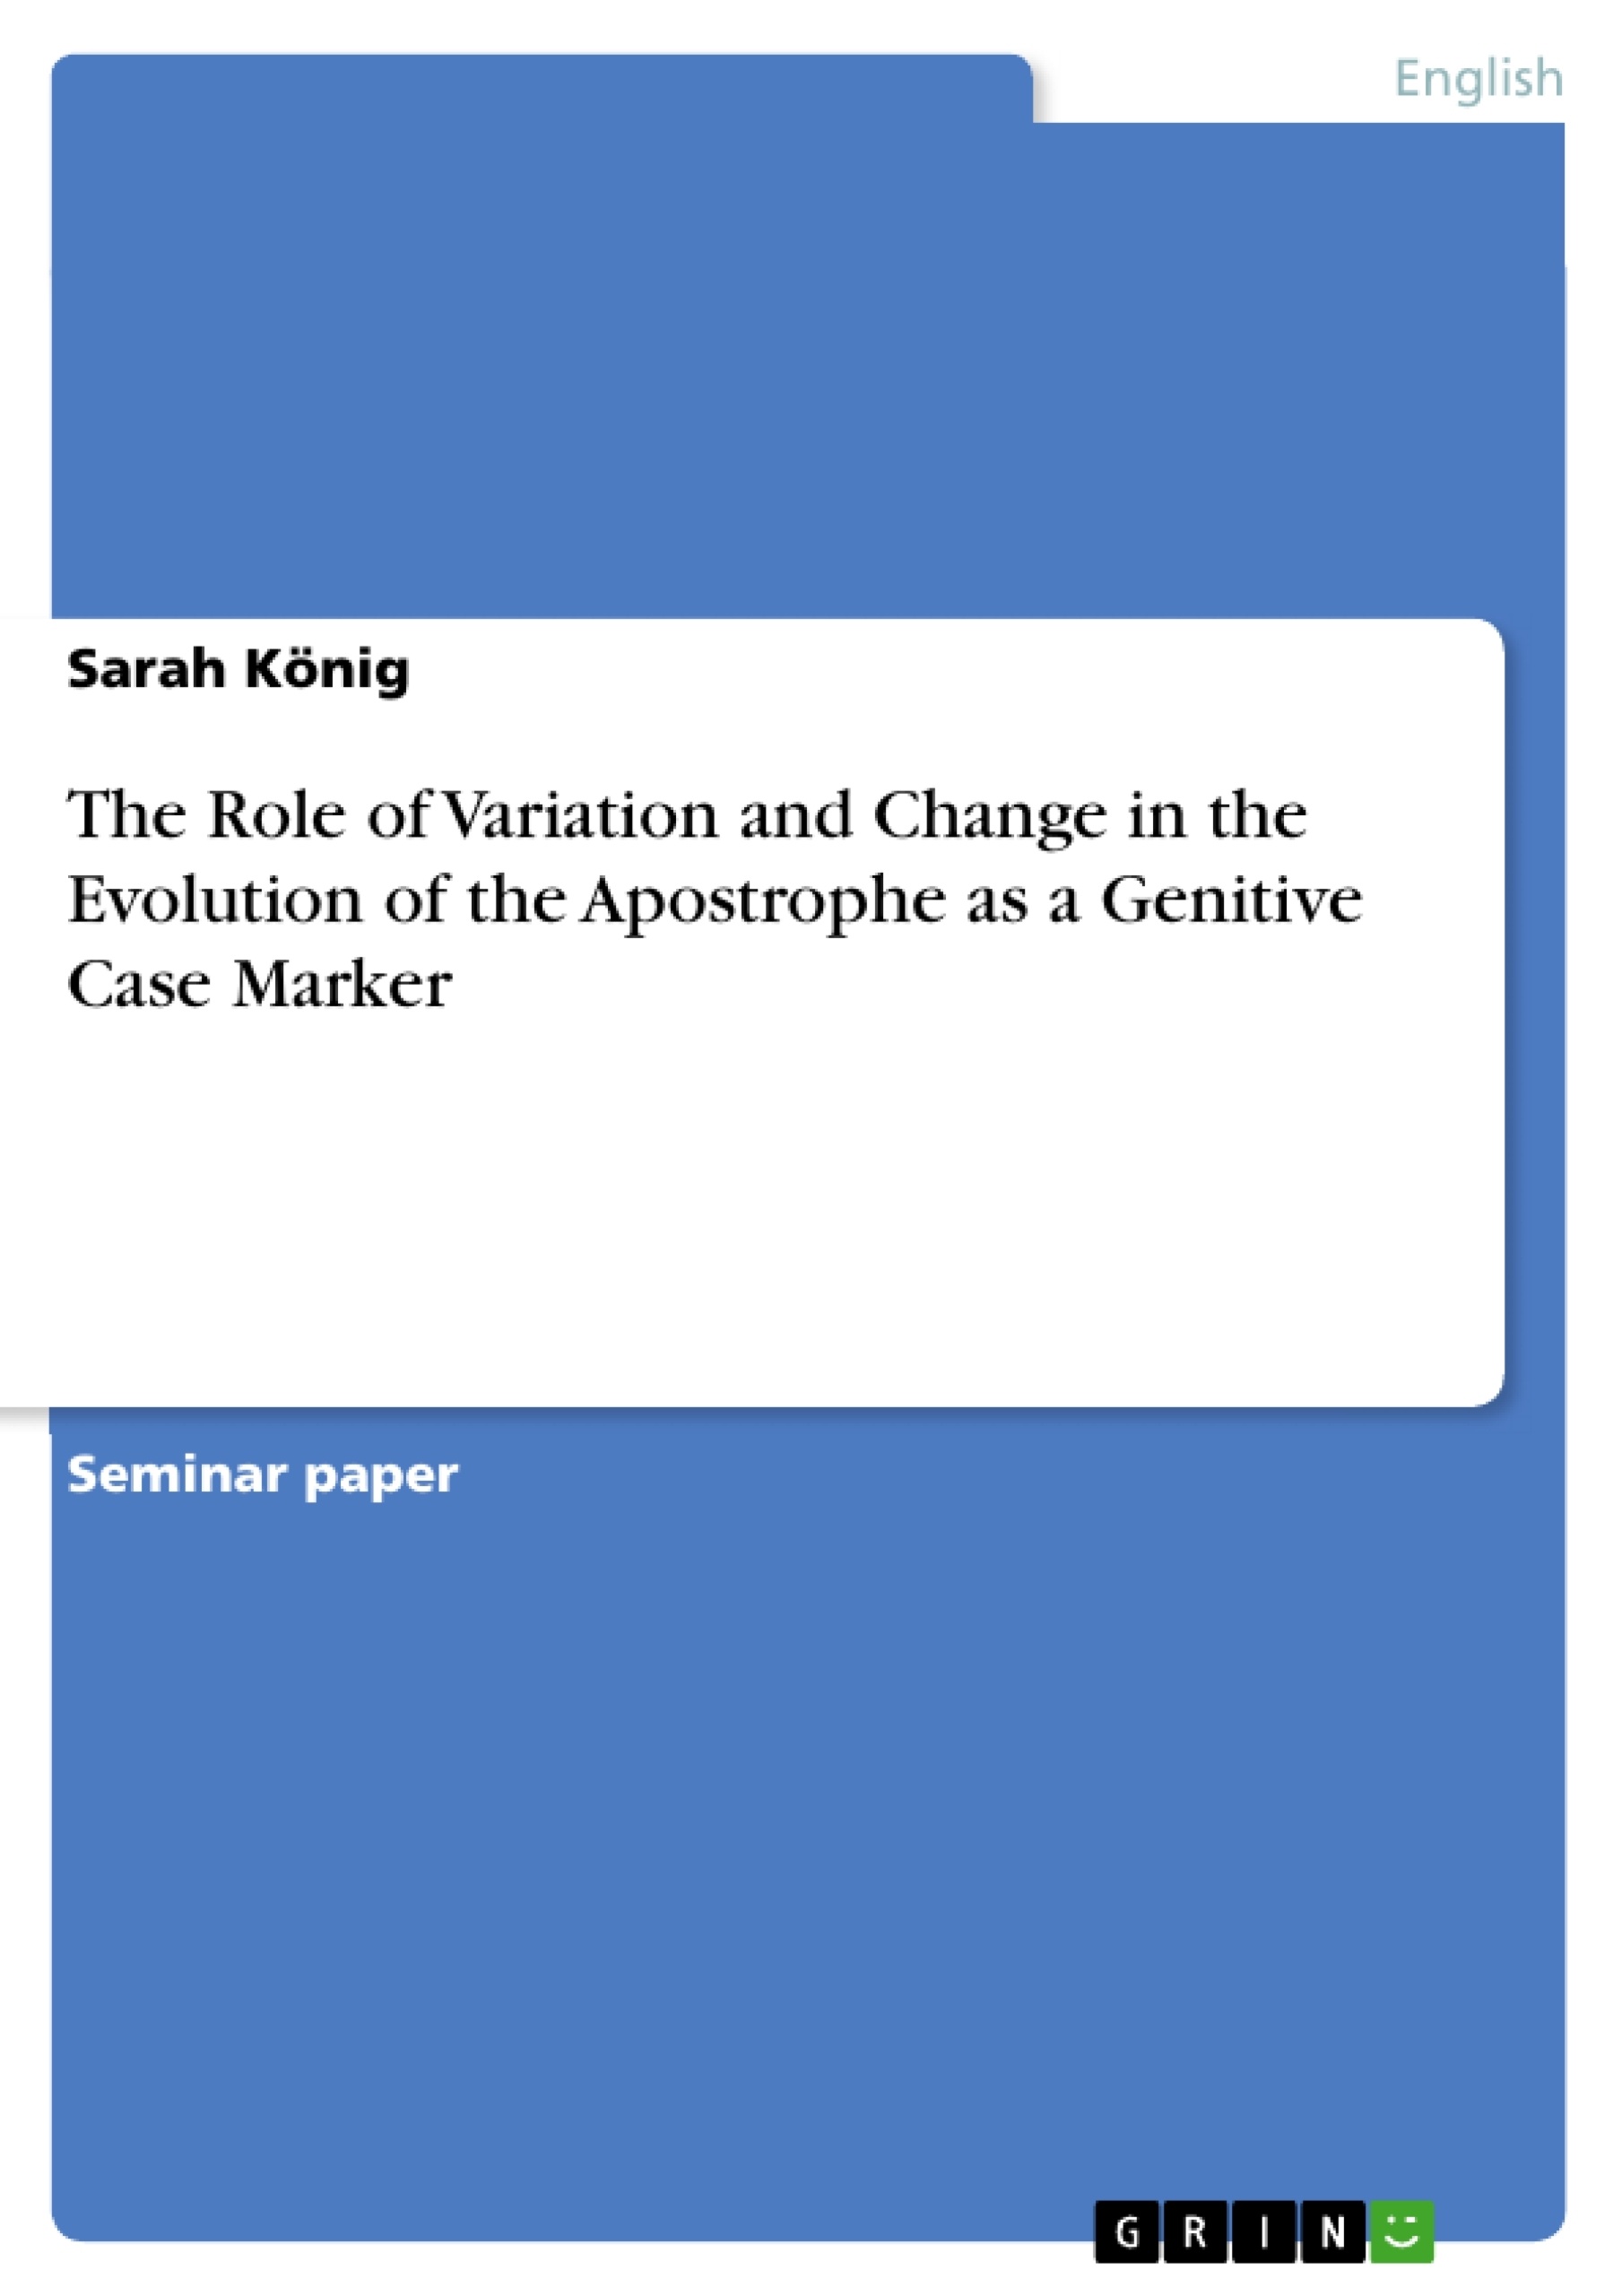 Título: The Role of Variation and Change in the Evolution of the Apostrophe as a Genitive Case Marker